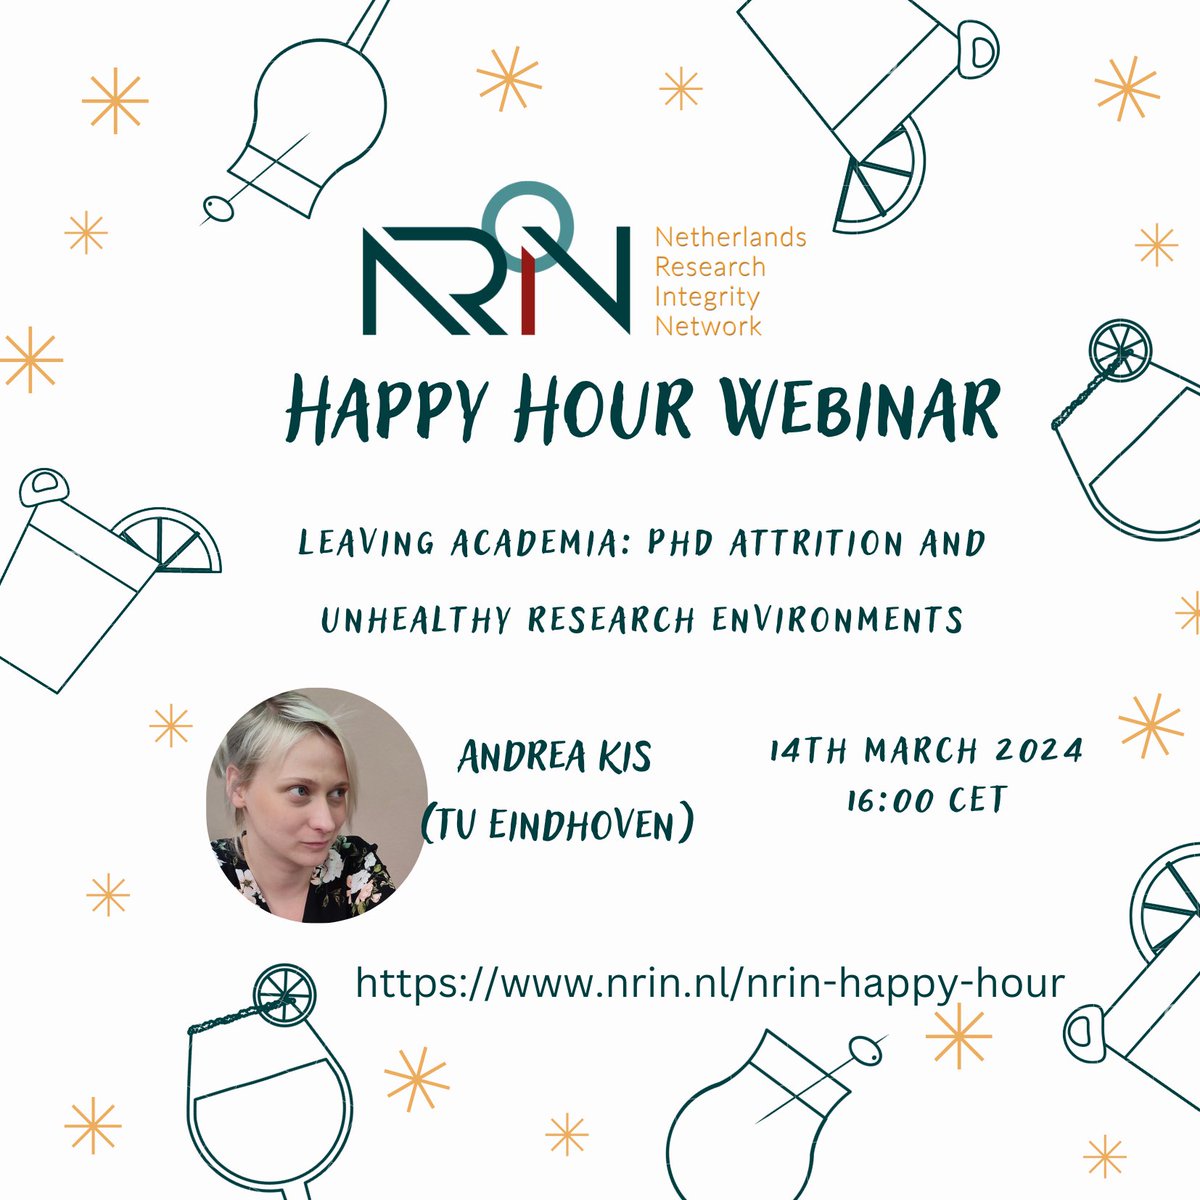 Our next webinar will be on 14.03.24, 16:00 CET, focusing on Leaving academia: PhD attrition and unhealthy research environments. Don’t miss the chance to learn from @andreakis_psy (@TUeindhoven)! Registration ➡ vu-live.zoom.us/webinar/regist… Full program ➡ nrin.nl/nrin-happy-hour